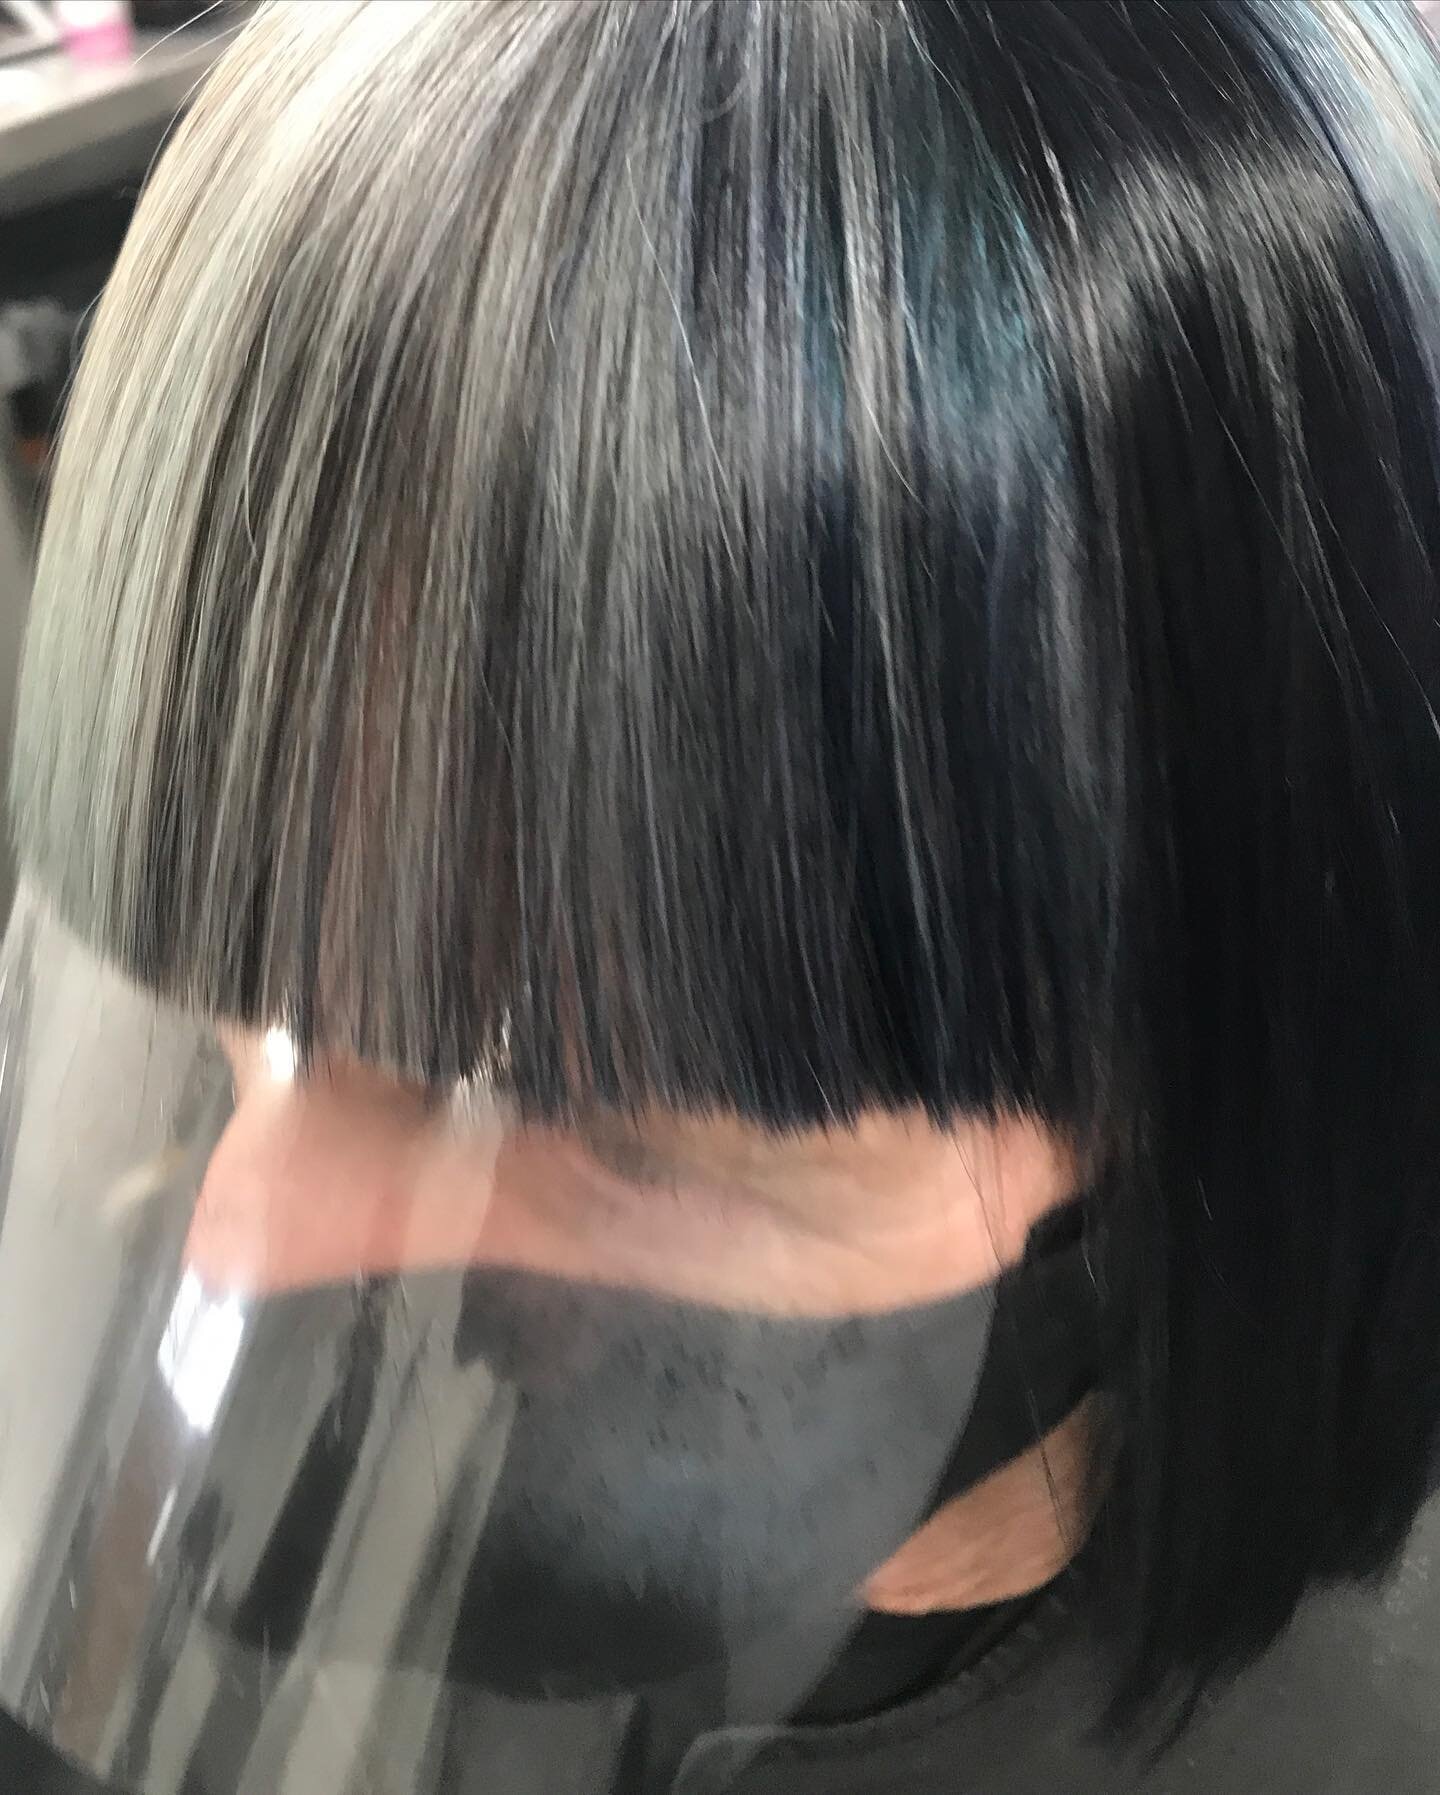 Love it when I get to play! #stripesonstripes #salonproof  #tonesofblue